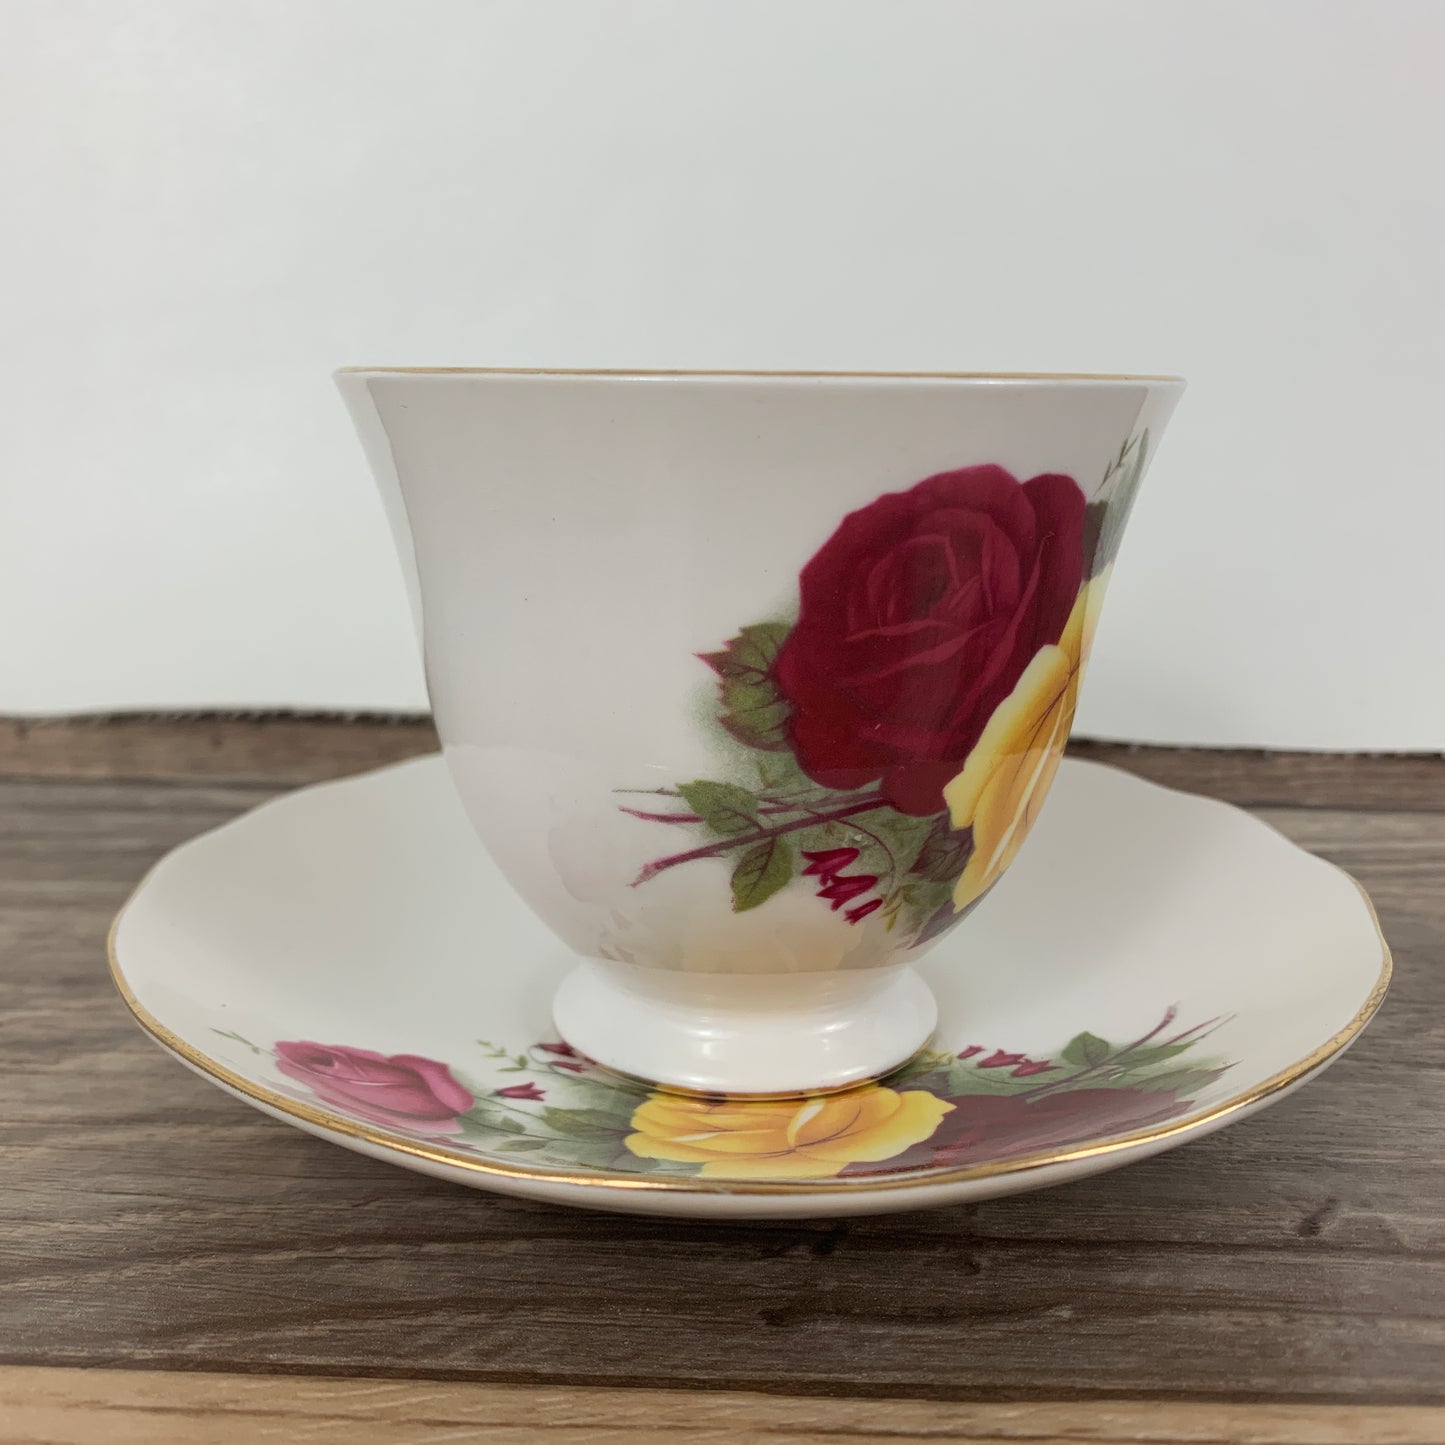 Queen Anne Vintage Teacup with Red, Yellow, and Pink Roses